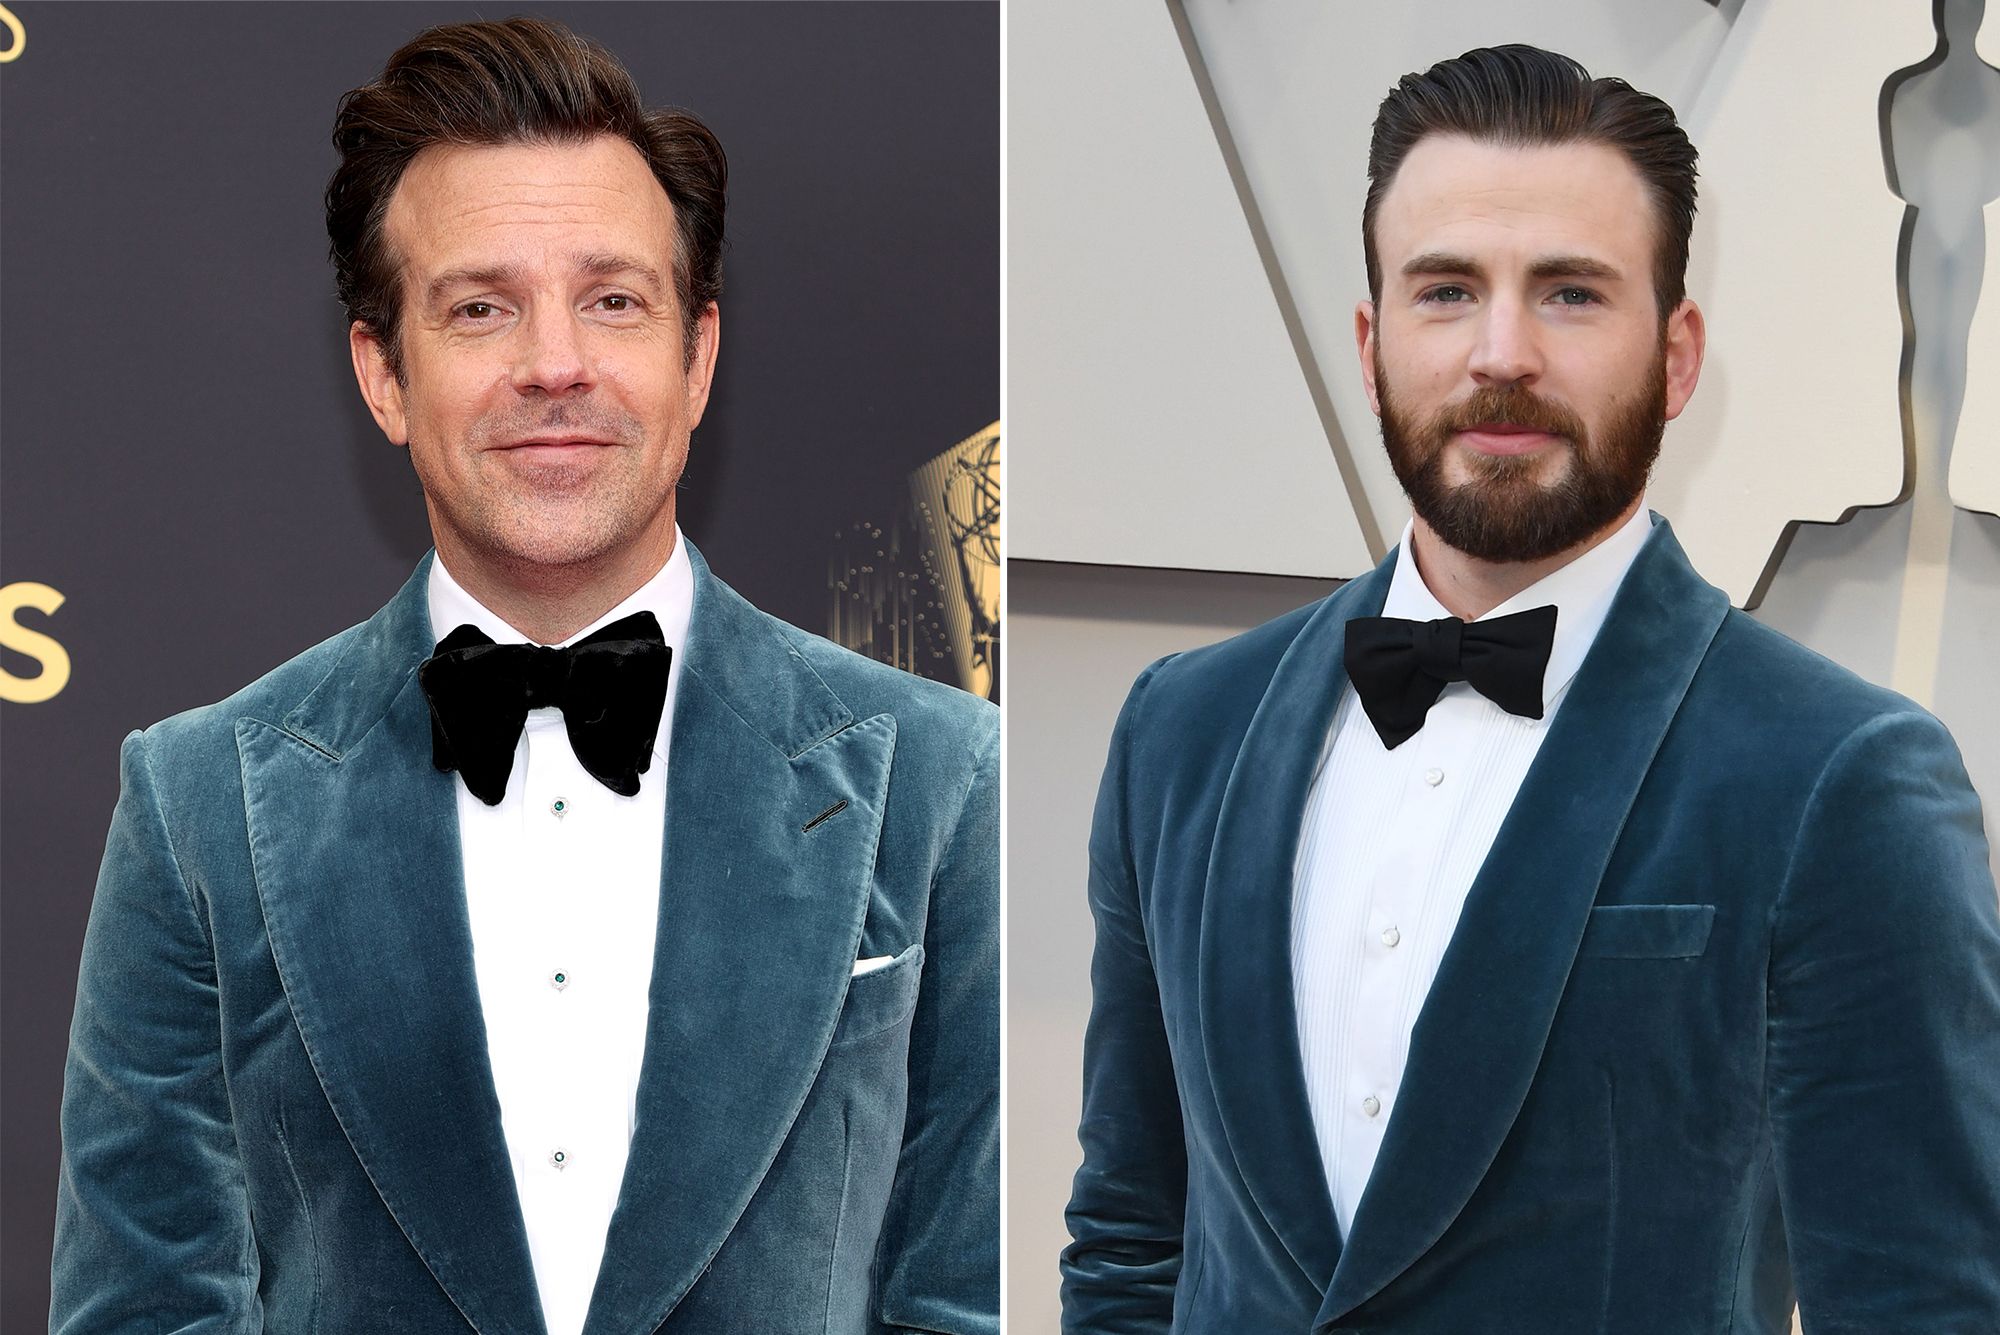 Jason Sudeikis Emmy 2021 Outfit Double With Chris Evans Look in 2019!